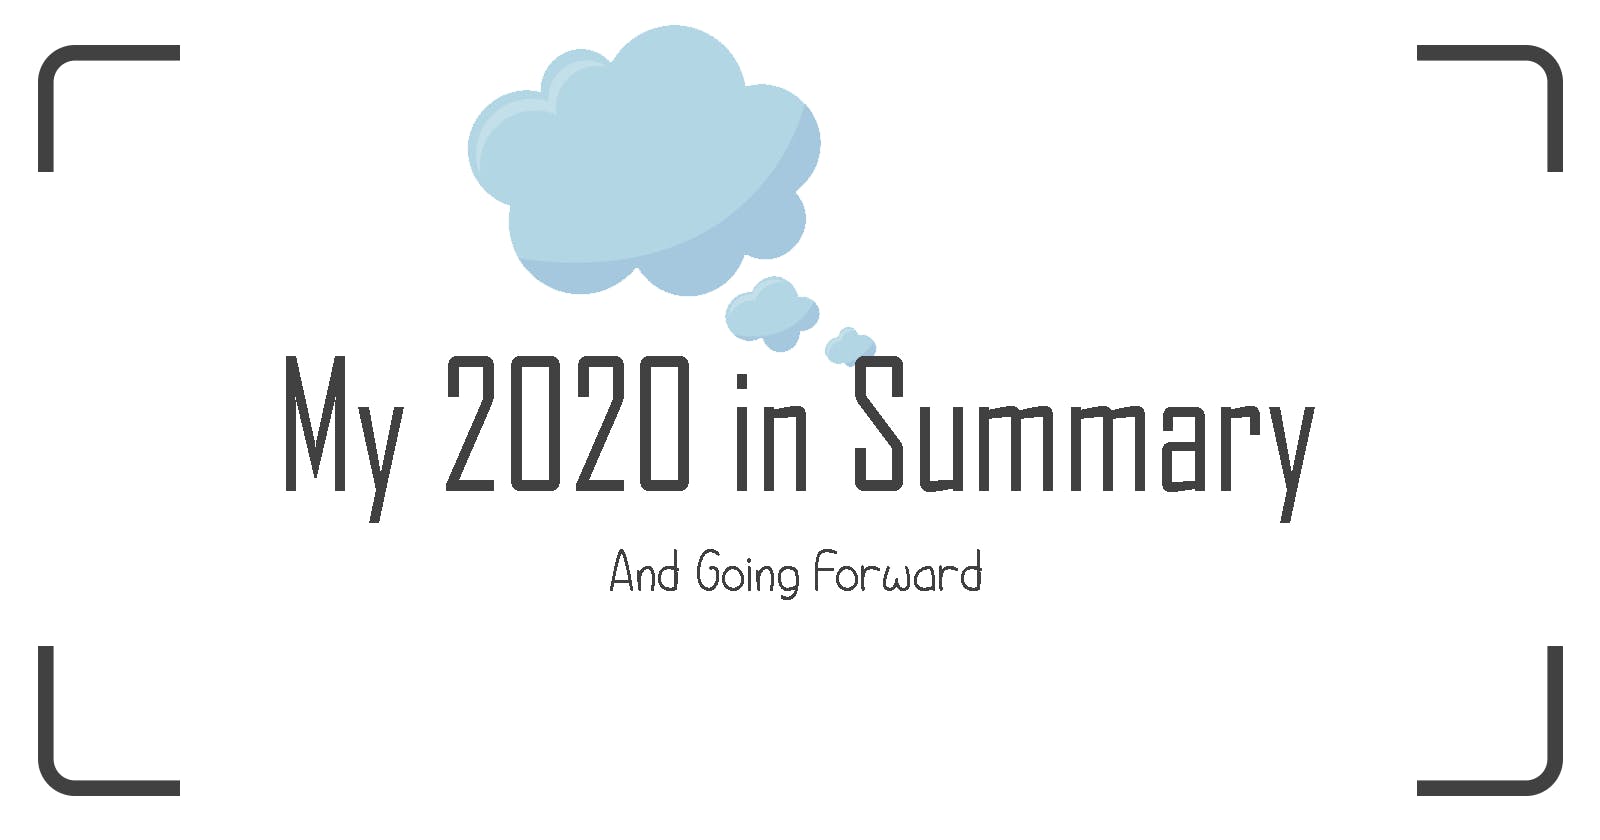 My 2020 In Summary and Going Forward